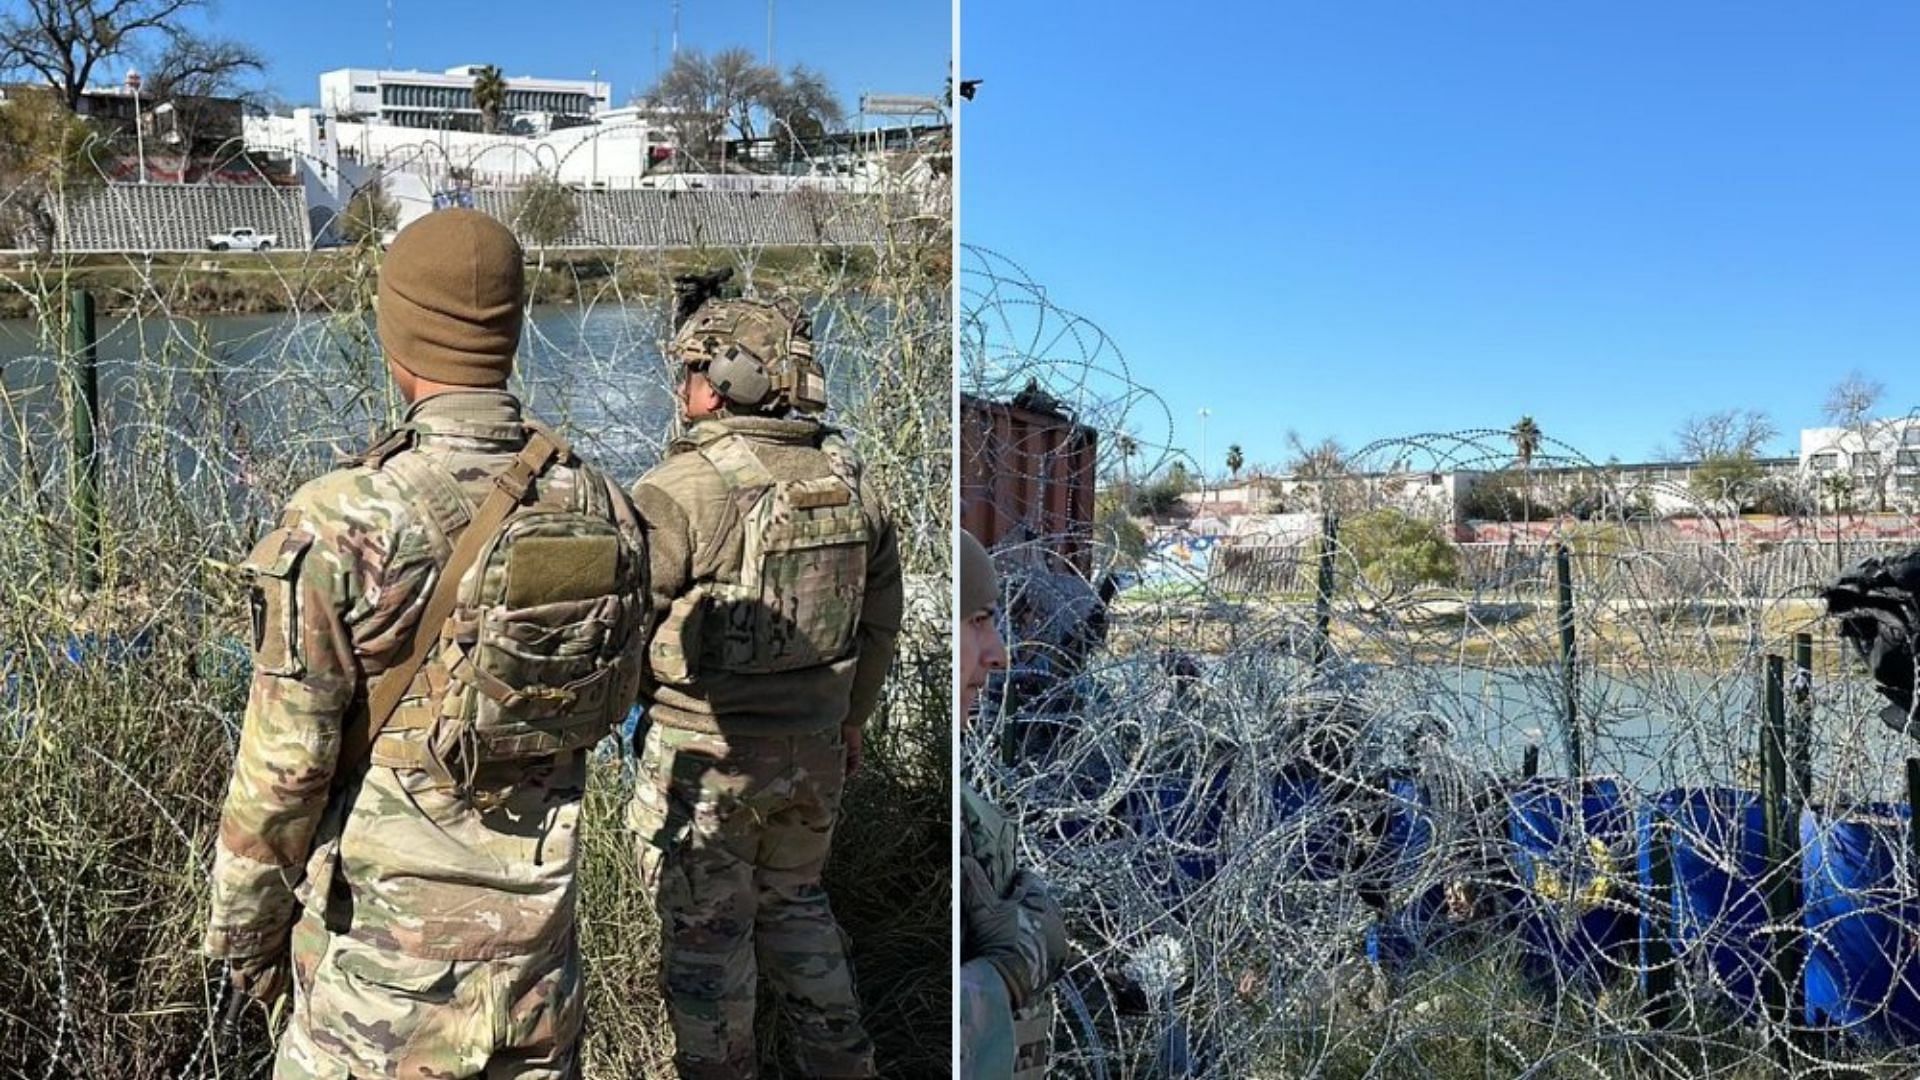 Texas National Guard&rsquo;s response to Supreme Court&rsquo;s order of removing razor wires (Image via snip from Twitter/@dcvgroup)